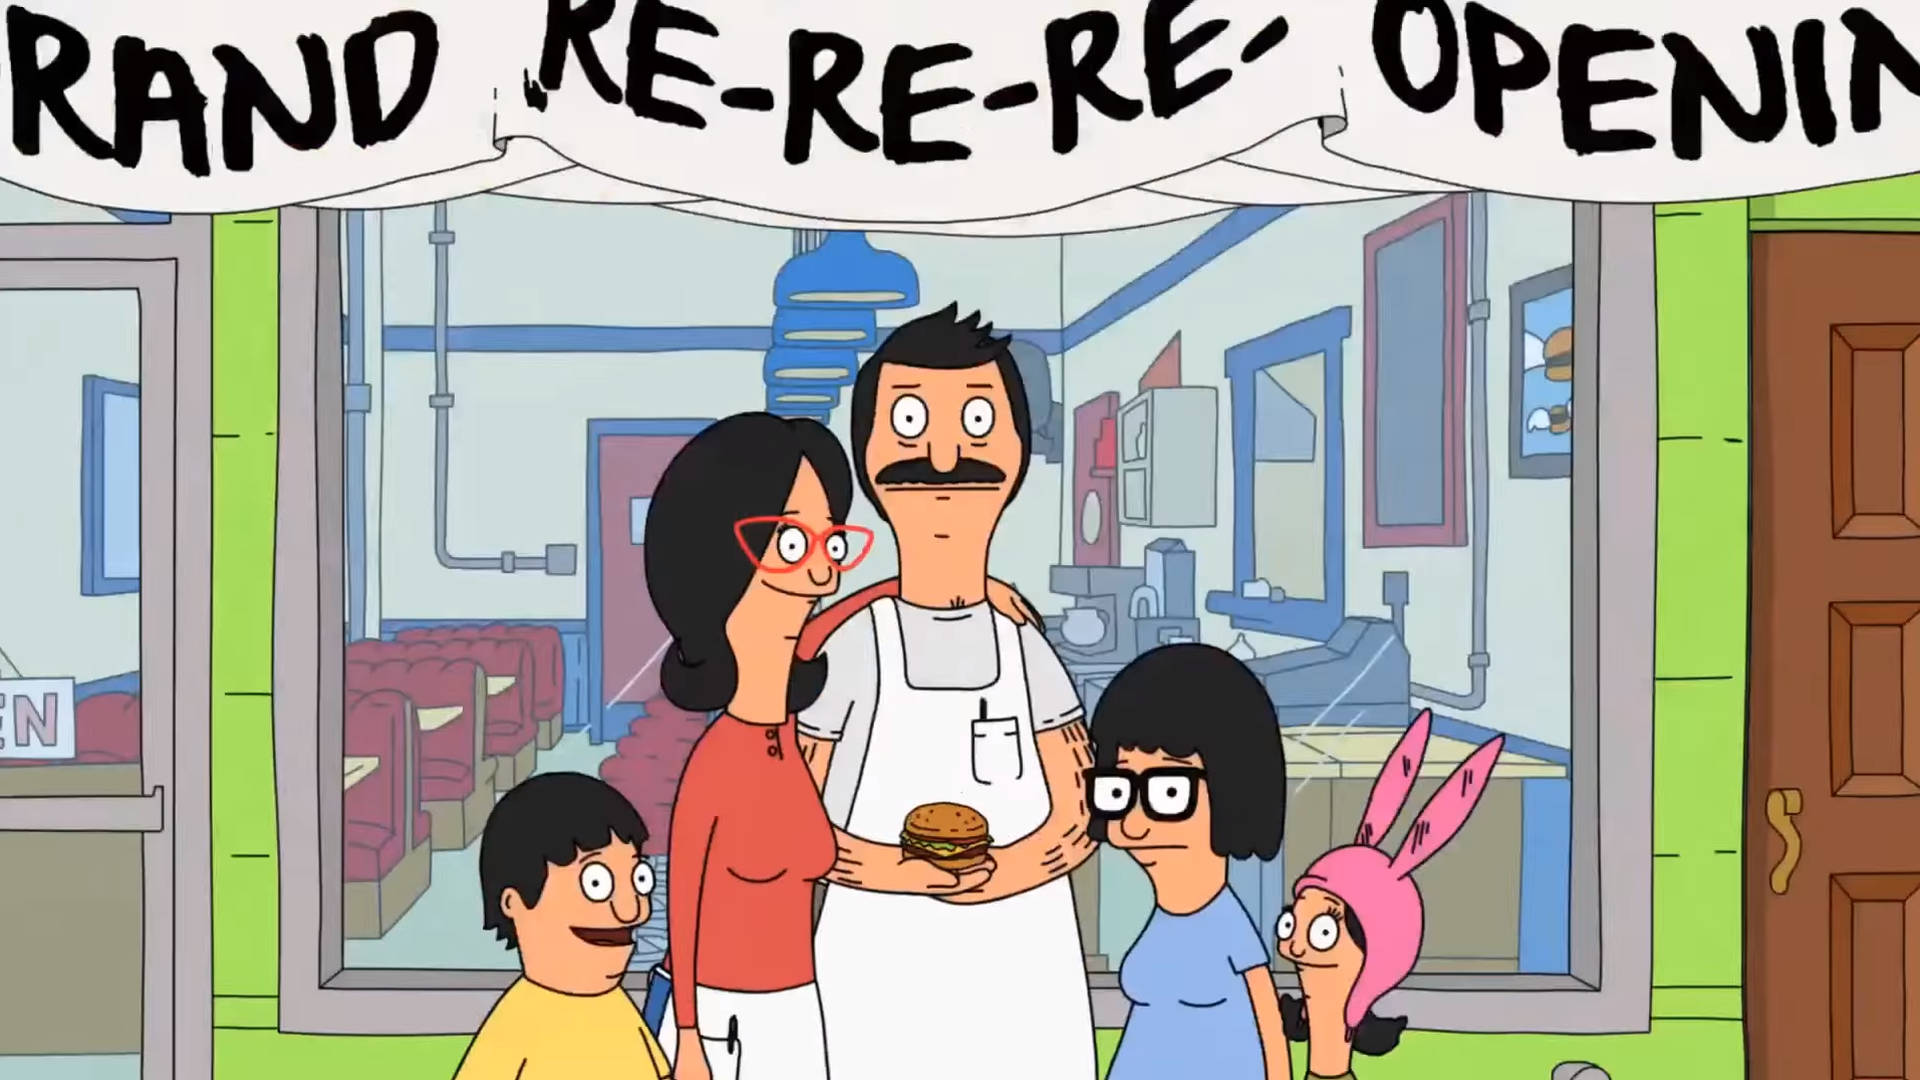 Bobs Burgers Grand Re-re-re-opening Wallpaper